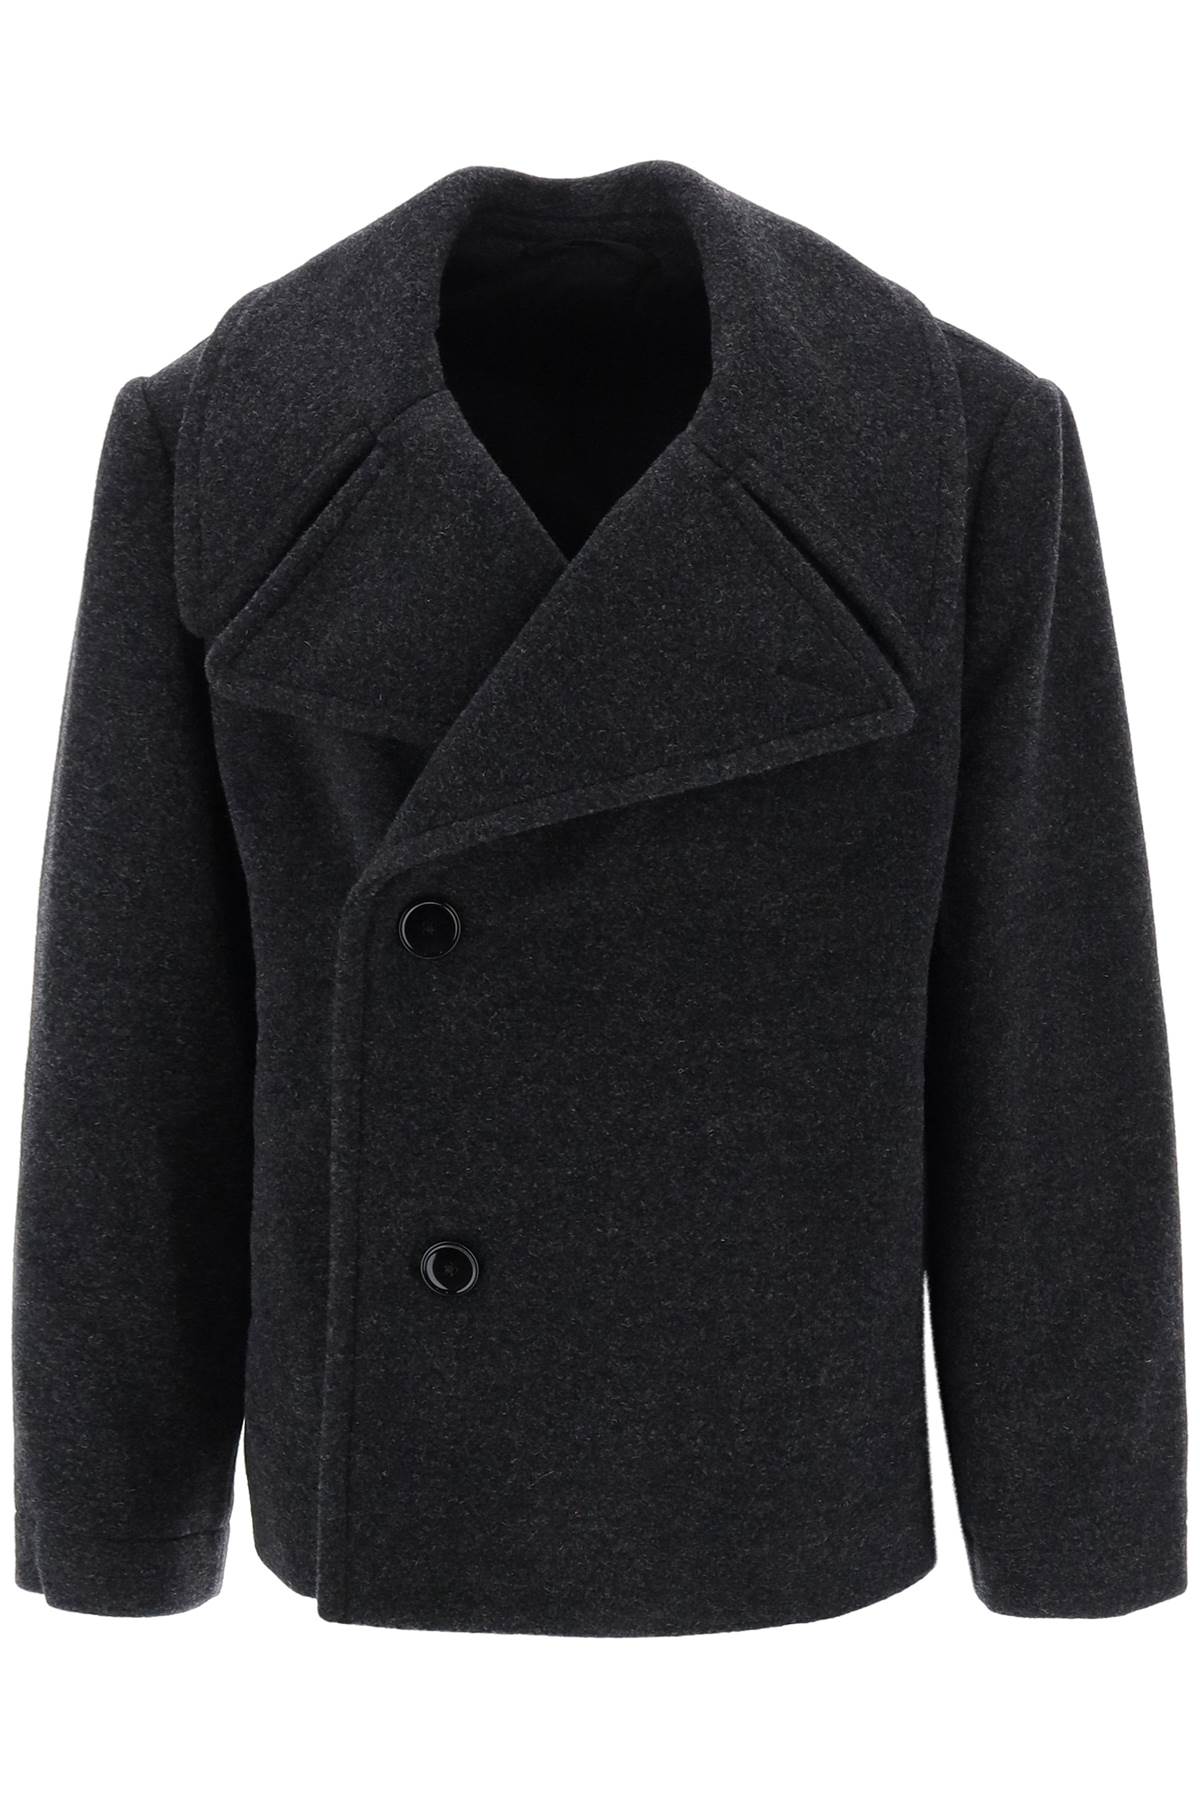 LEMAIRE DOUBLE-BREASTED PEACOAT IN MELANGE WOOL